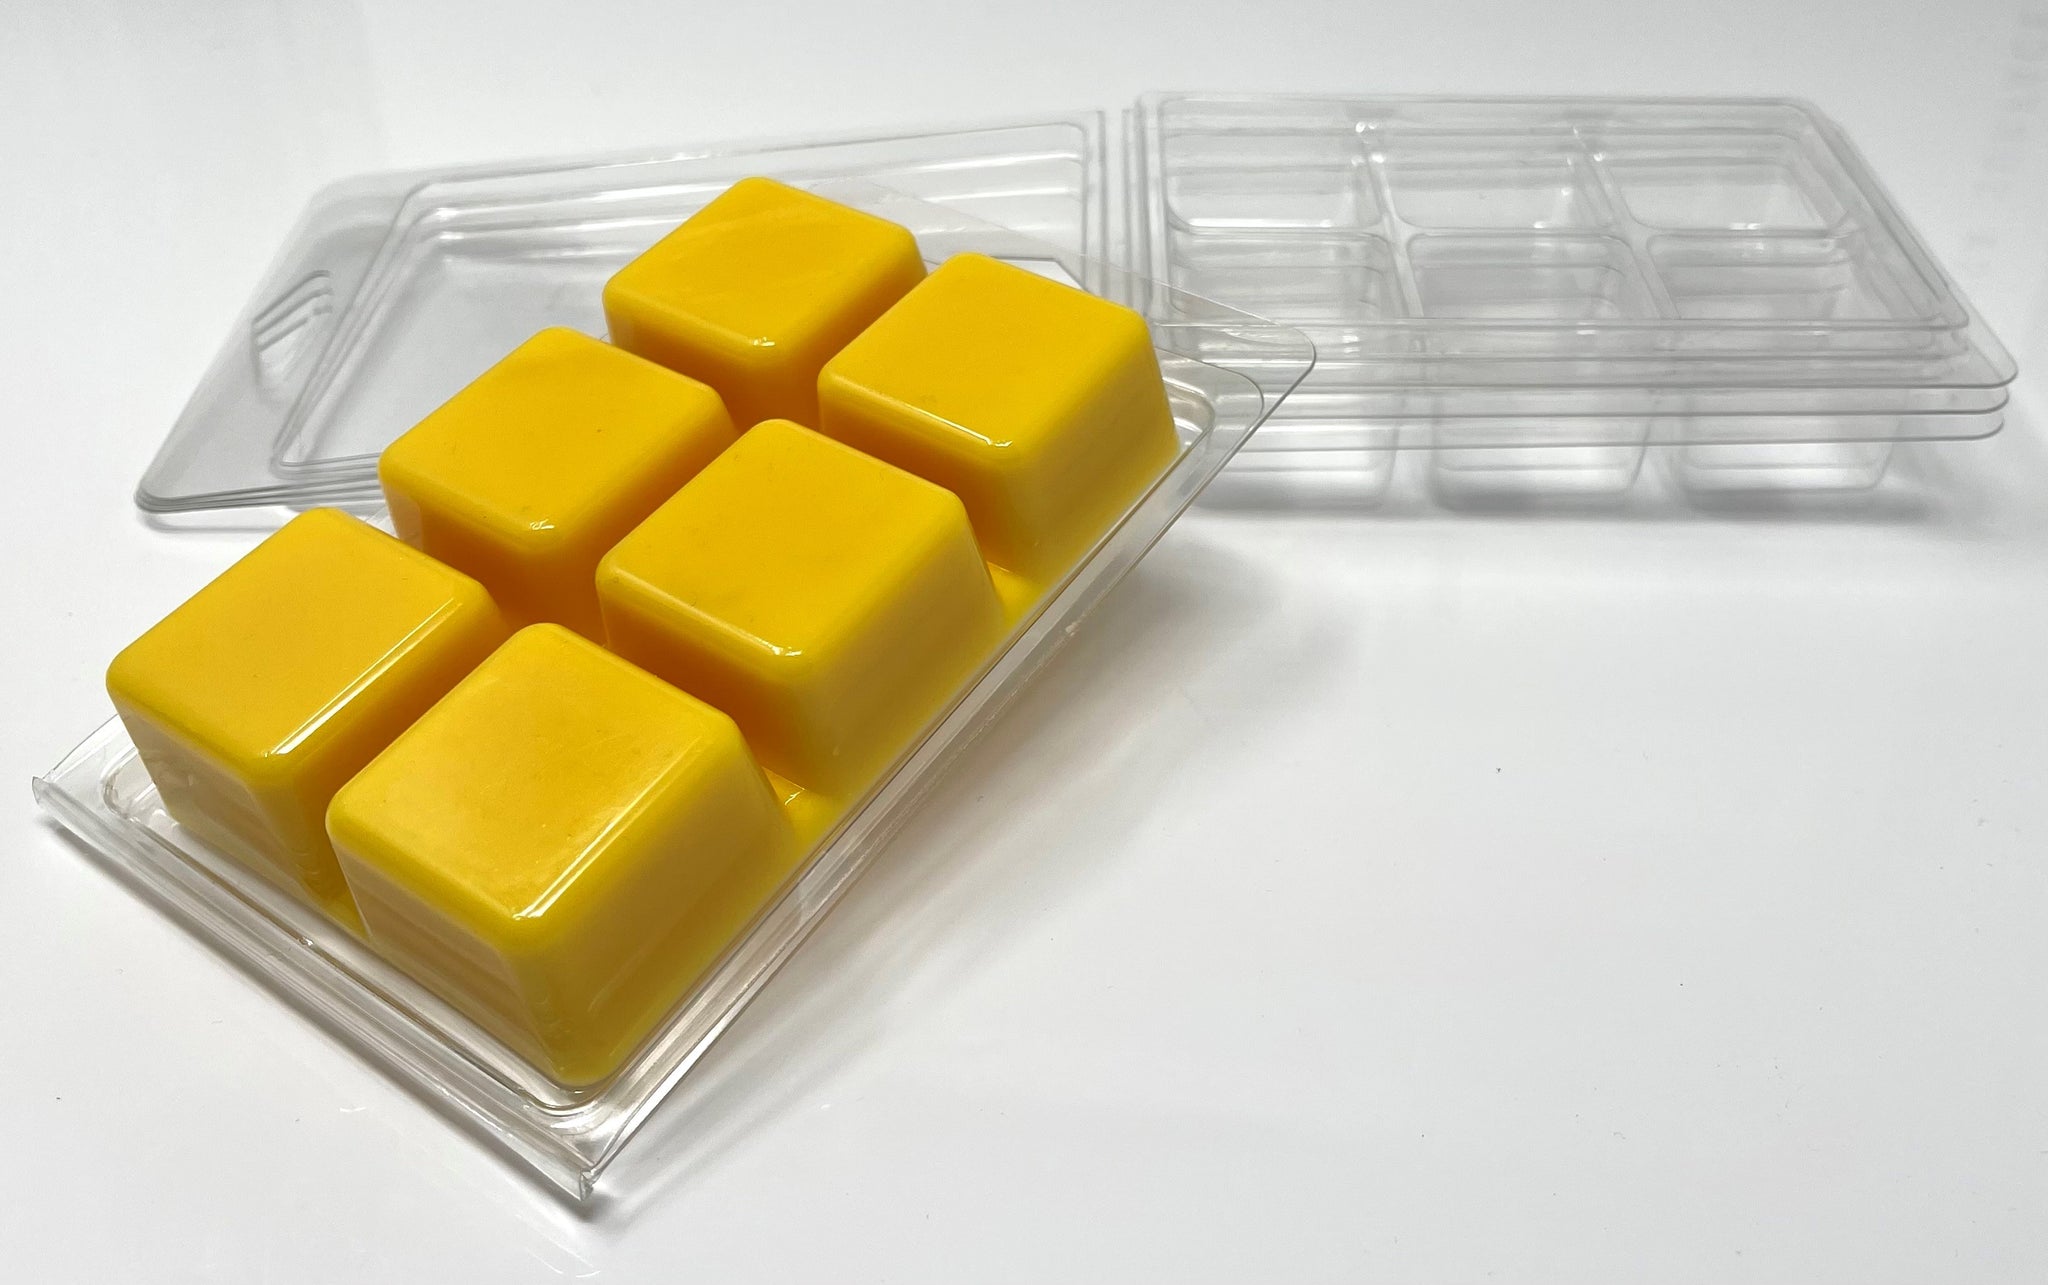 Large 6 x 4 cell Clamshell for Wax Melts